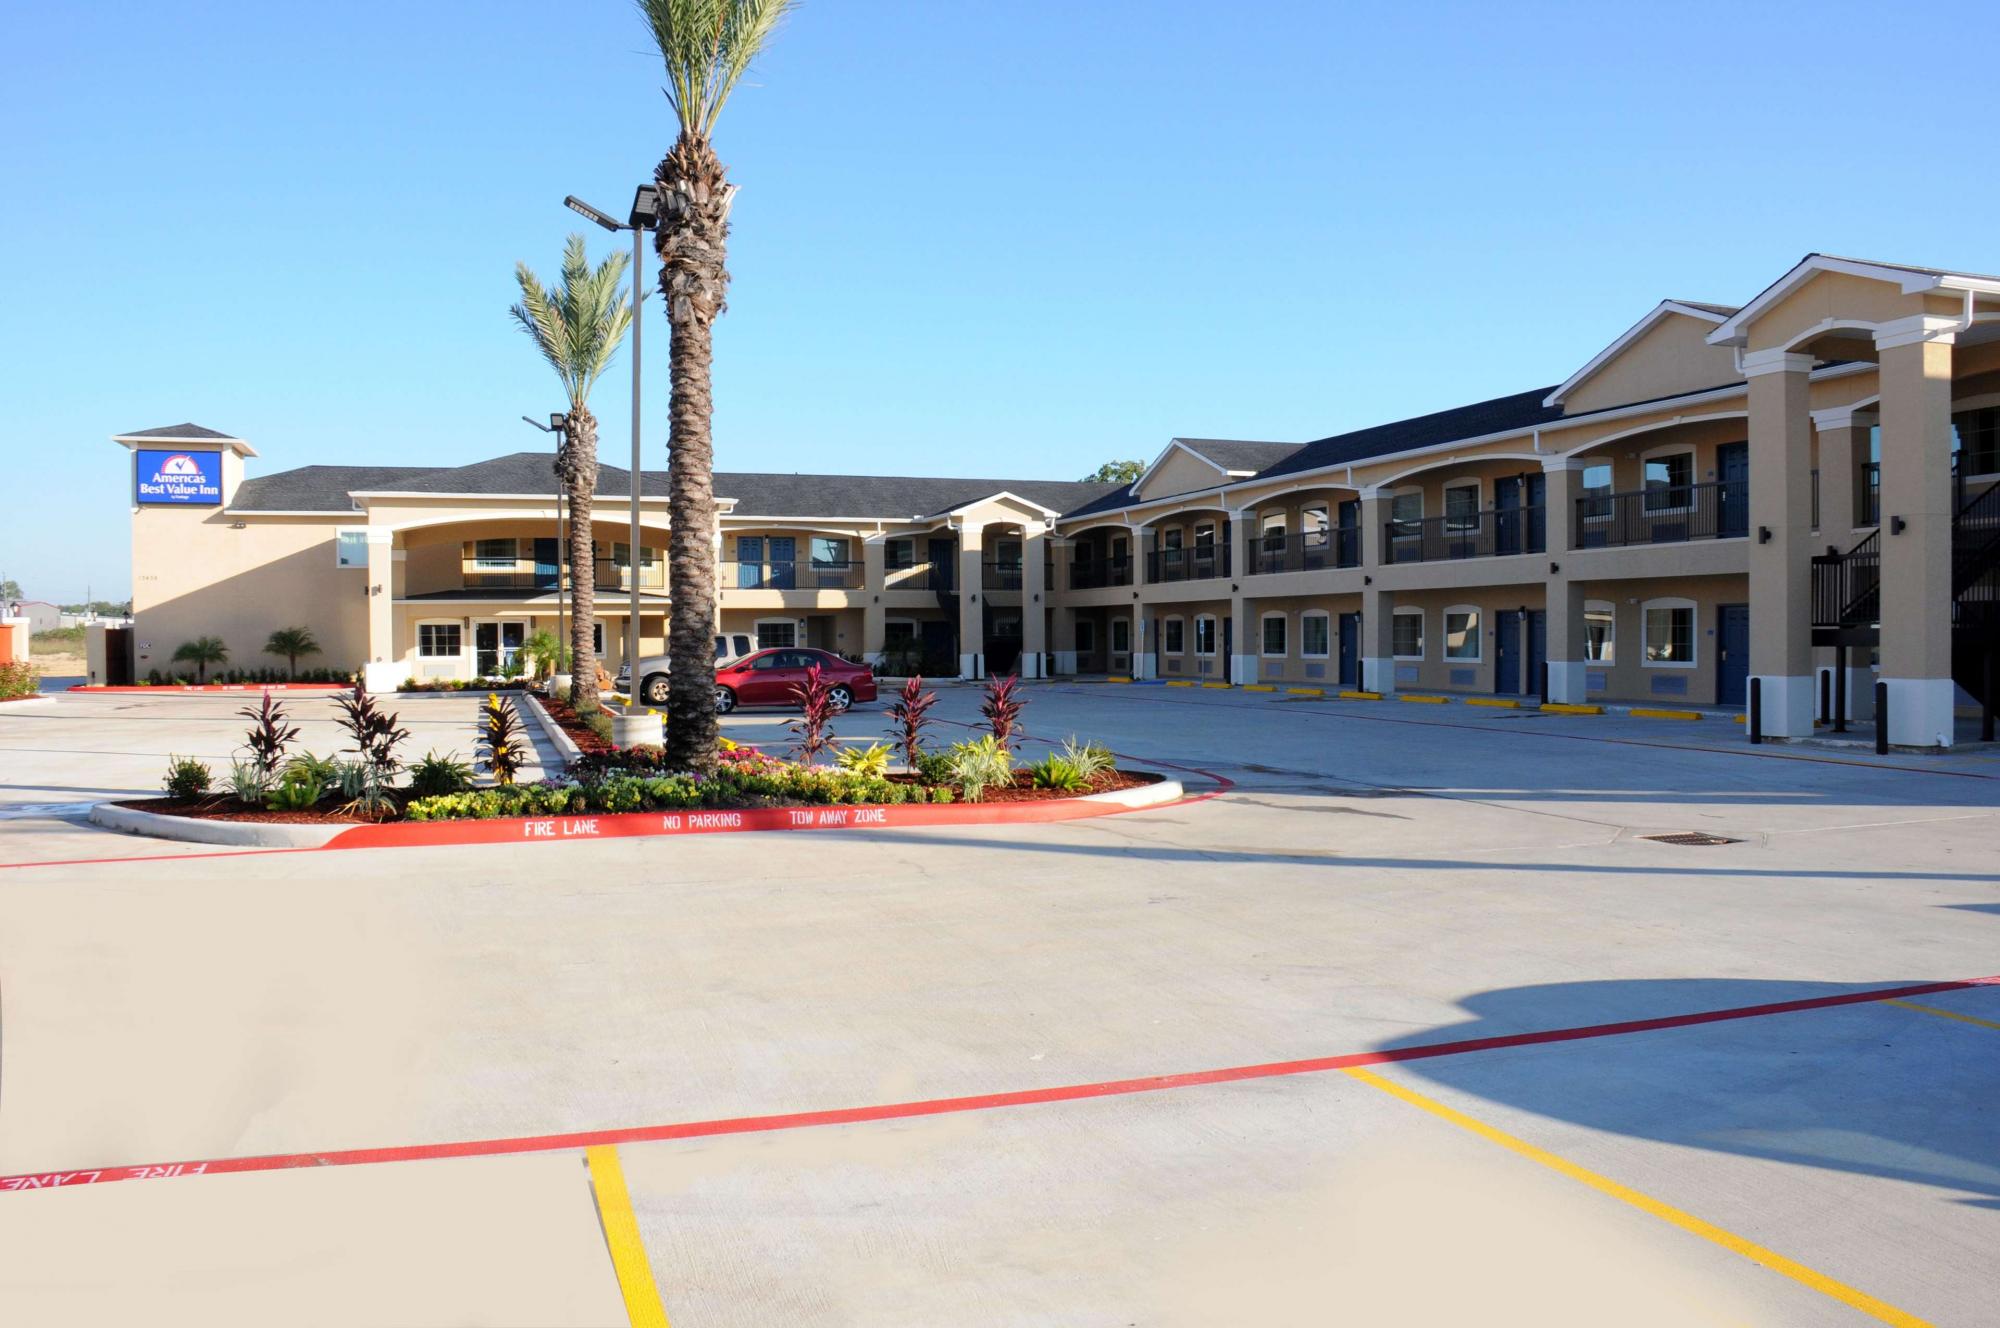 Hotel exterior with ample parking and palm trees